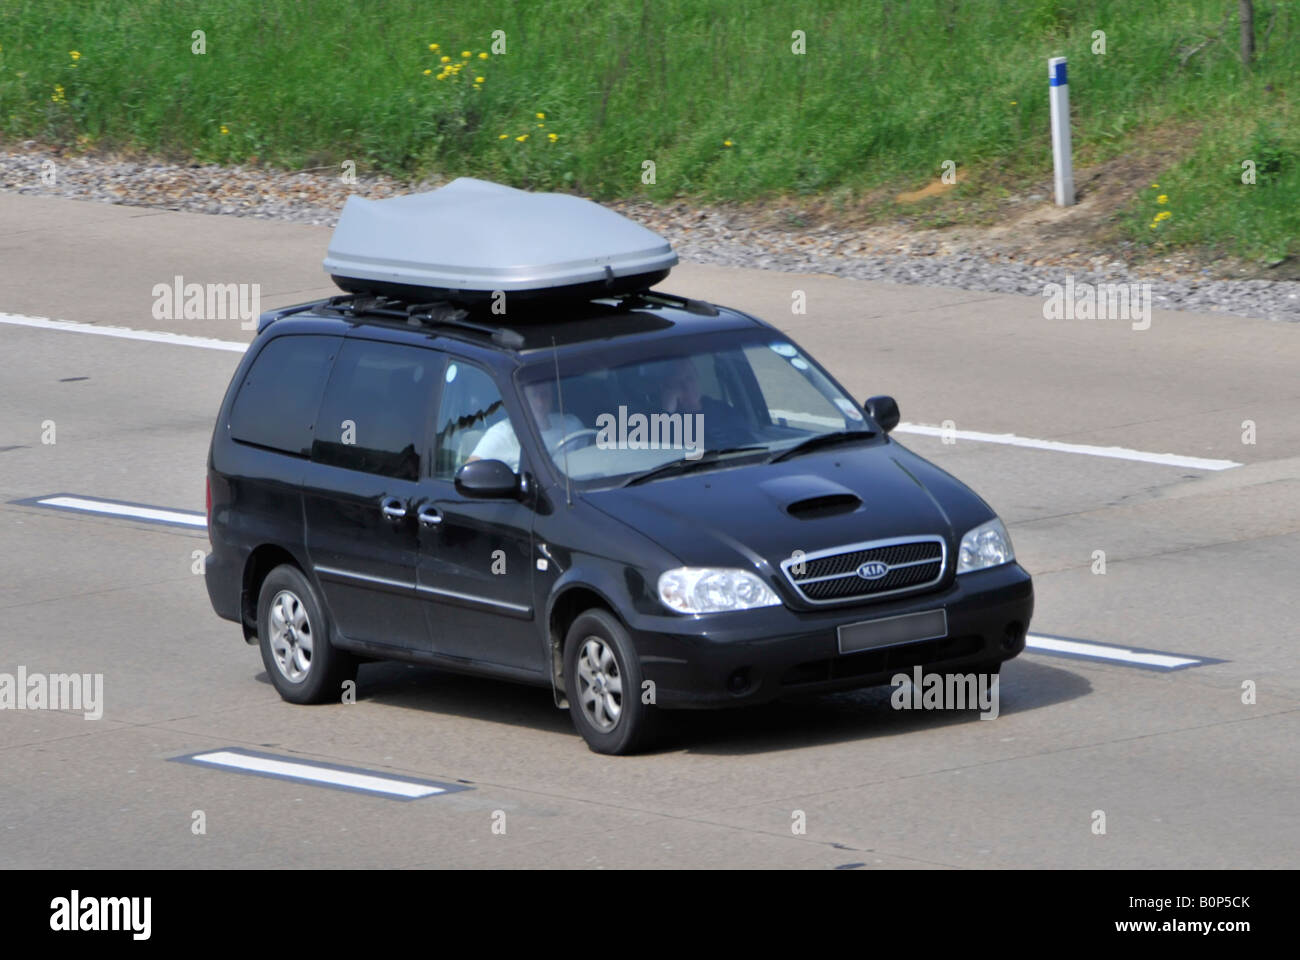 Kia car roof box on motorway obscured numberplate and tinted glass Stock Photo